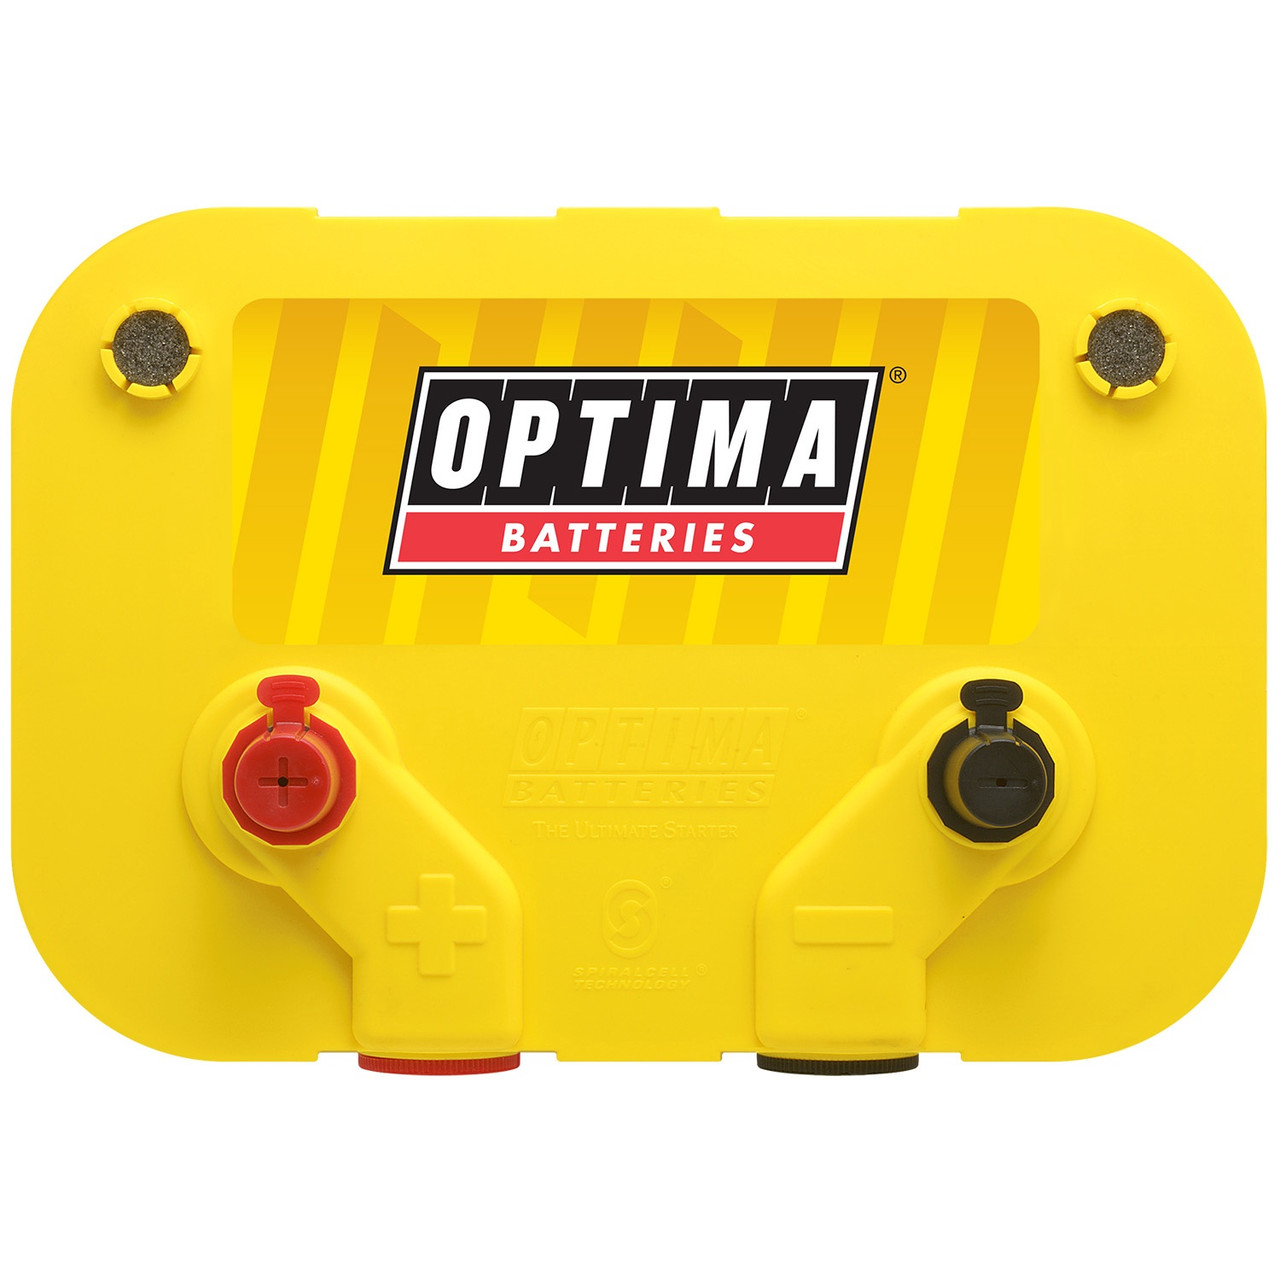 BATTERY OPTIMA BATTERIES YELLOW TOP D34/78 8014-745 - A. Ally & Sons